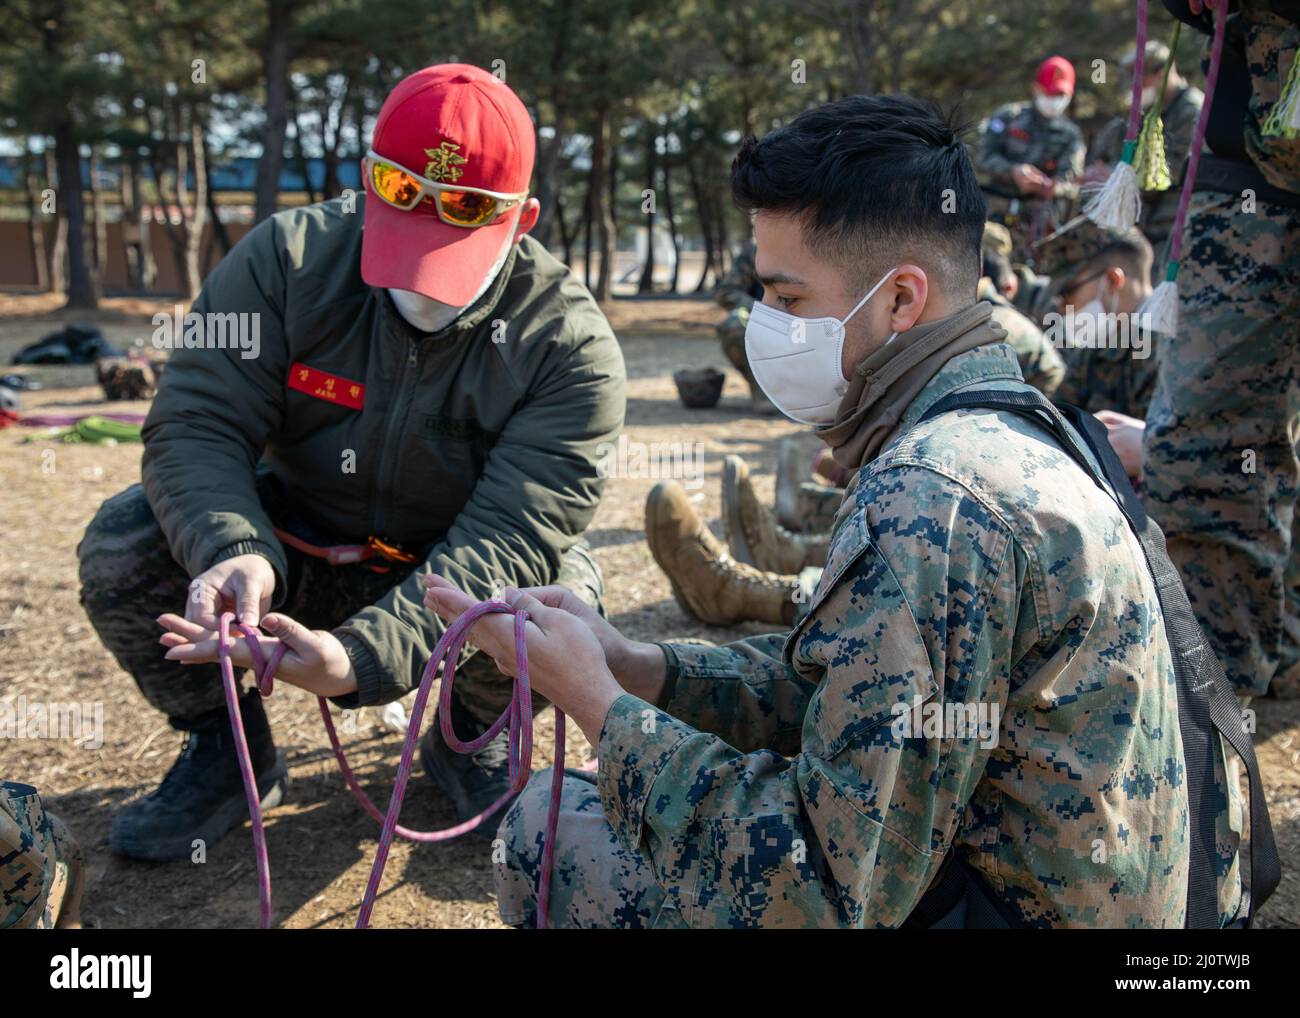 U.S. Marine Corps Sgt. Mathew Calderon, a data systems administrator with U.S. Marine Corps Forces Korea, right, practices tying knots during a ropes course with 3D Sustainment Group (Experimental), 3D Marine Logistics Group and Republic of Korea Marine Corps Ranger School in Pohang, South Korea, Jan. 27, 2022. The course increased the Marines’ readiness with rappelling and rope work while improving interoperability with our partners and allies. (U.S. Marine Corps photo by Sgt. Ash McLaughlin) Stock Photo